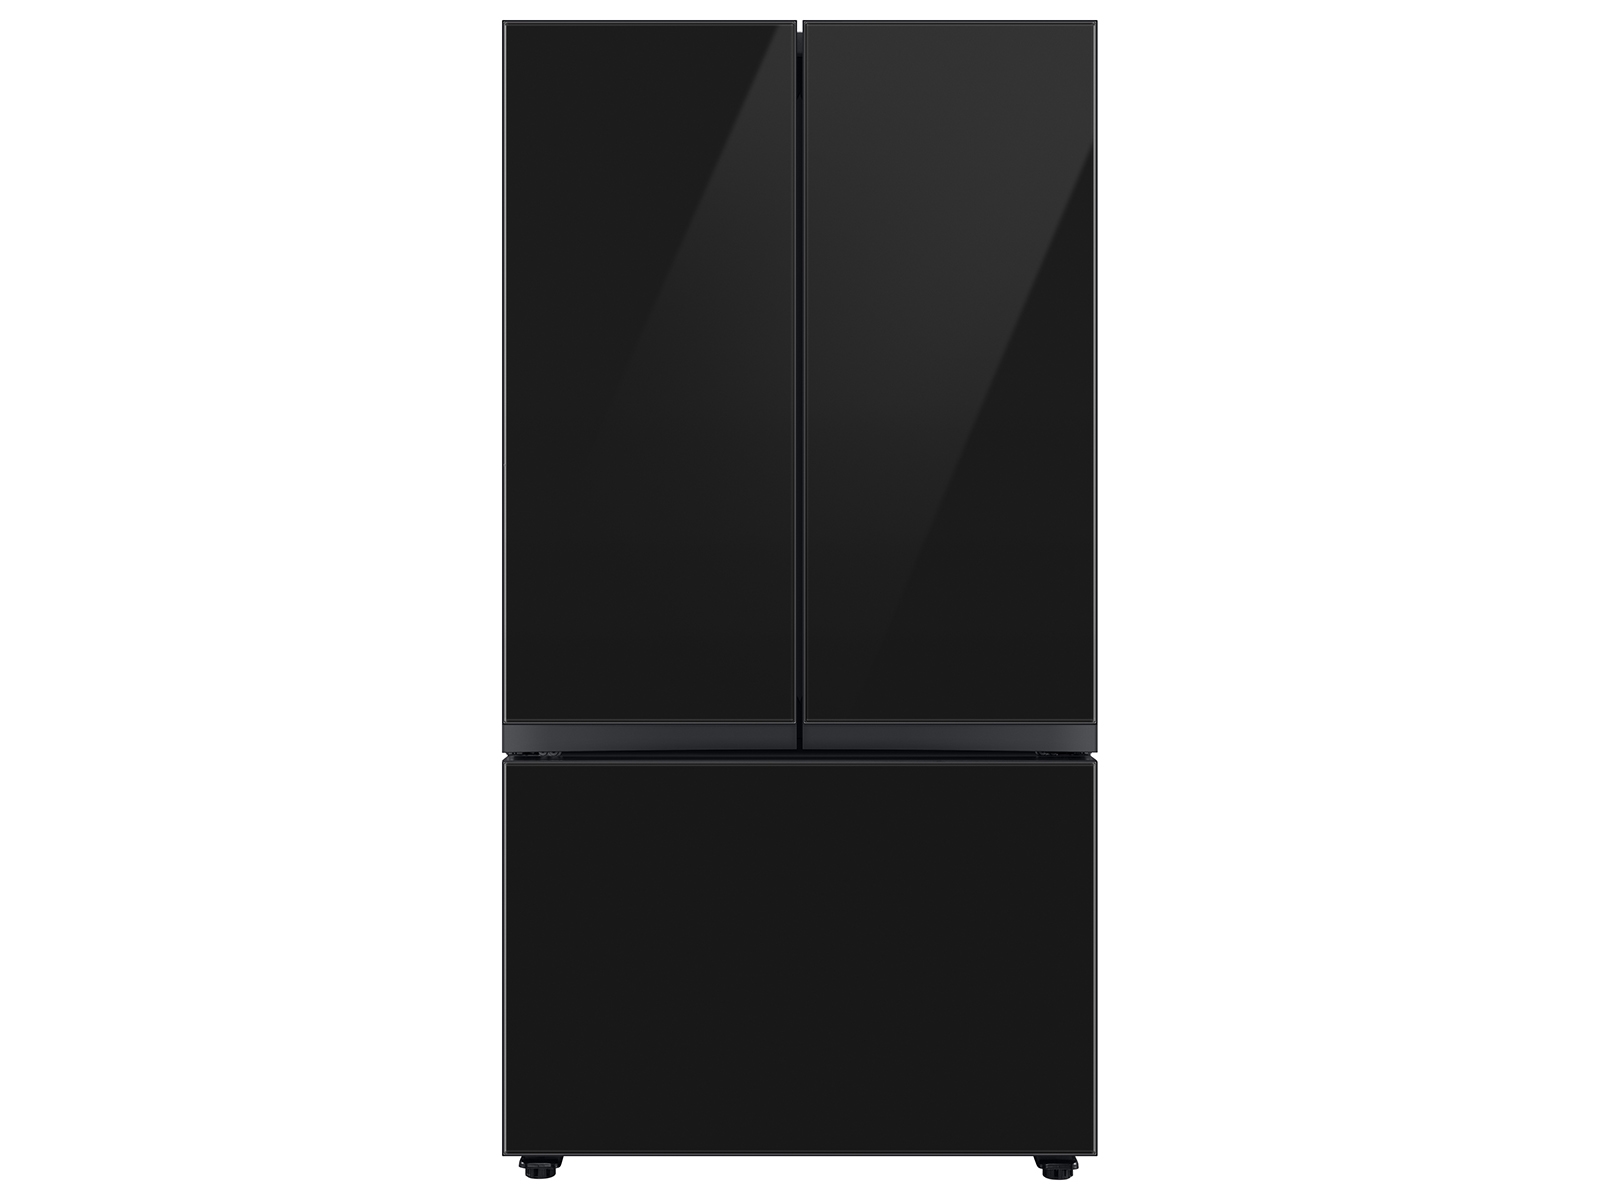 Samsung Bespoke 3-Door French Door Refrigerator (30 cu. ft.) with AutoFill Water Pitcher in Charcoal Glass(BNDL-1650392971882)